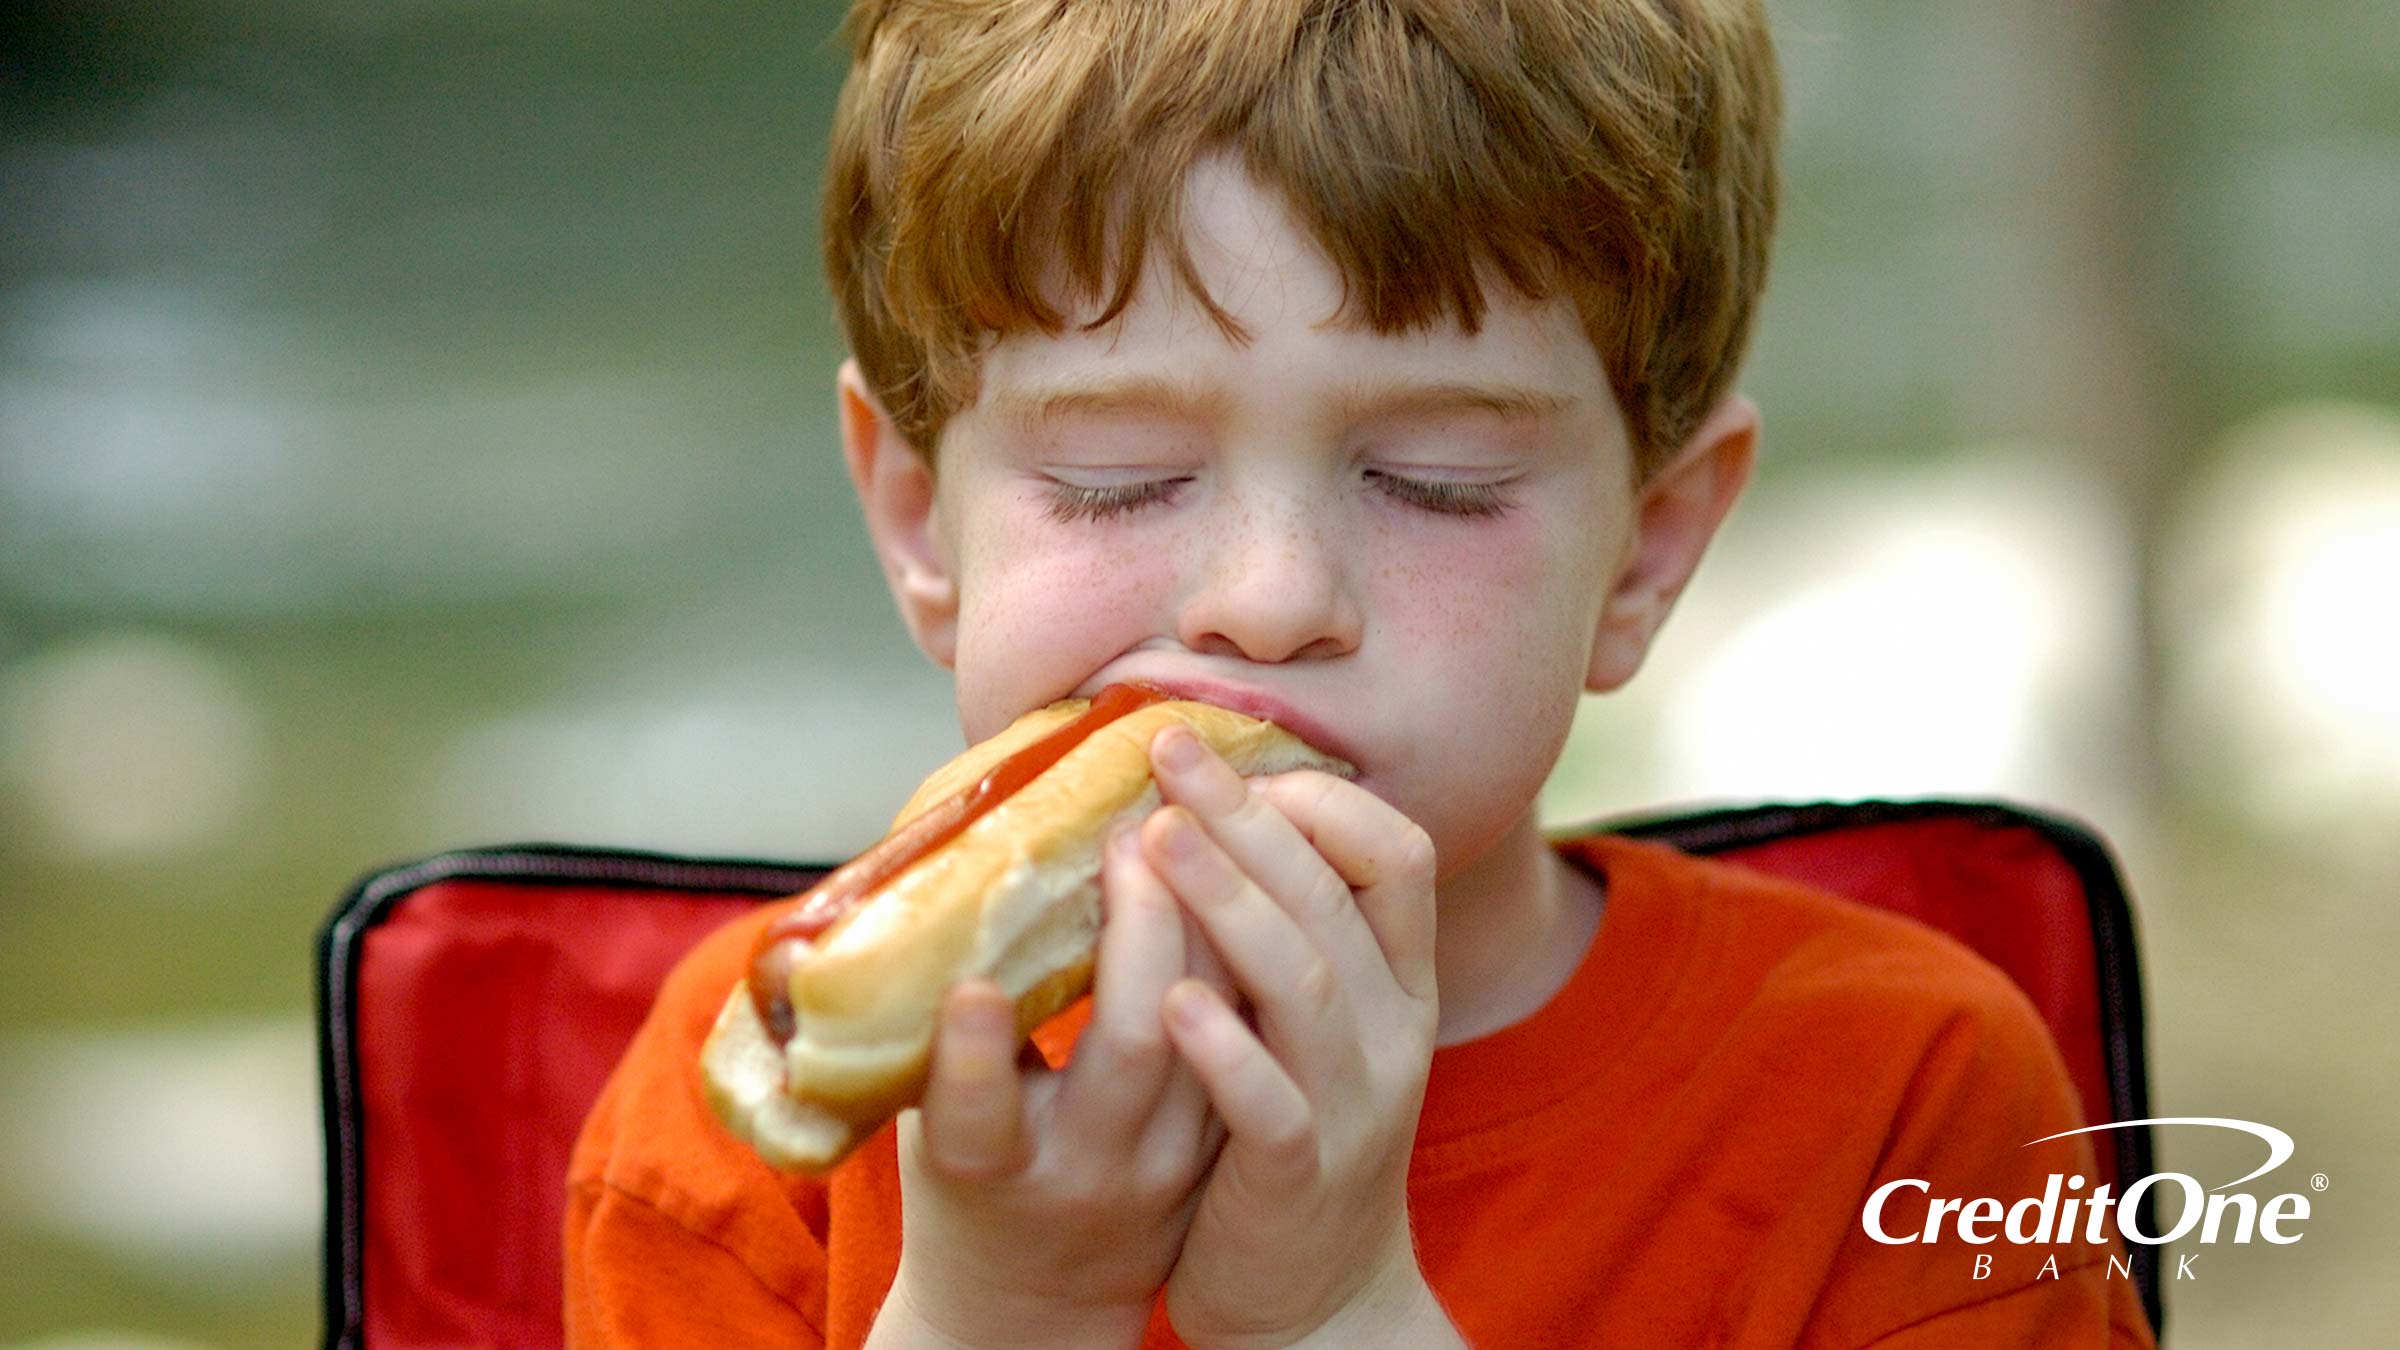 A Child Eating a Hot Dog